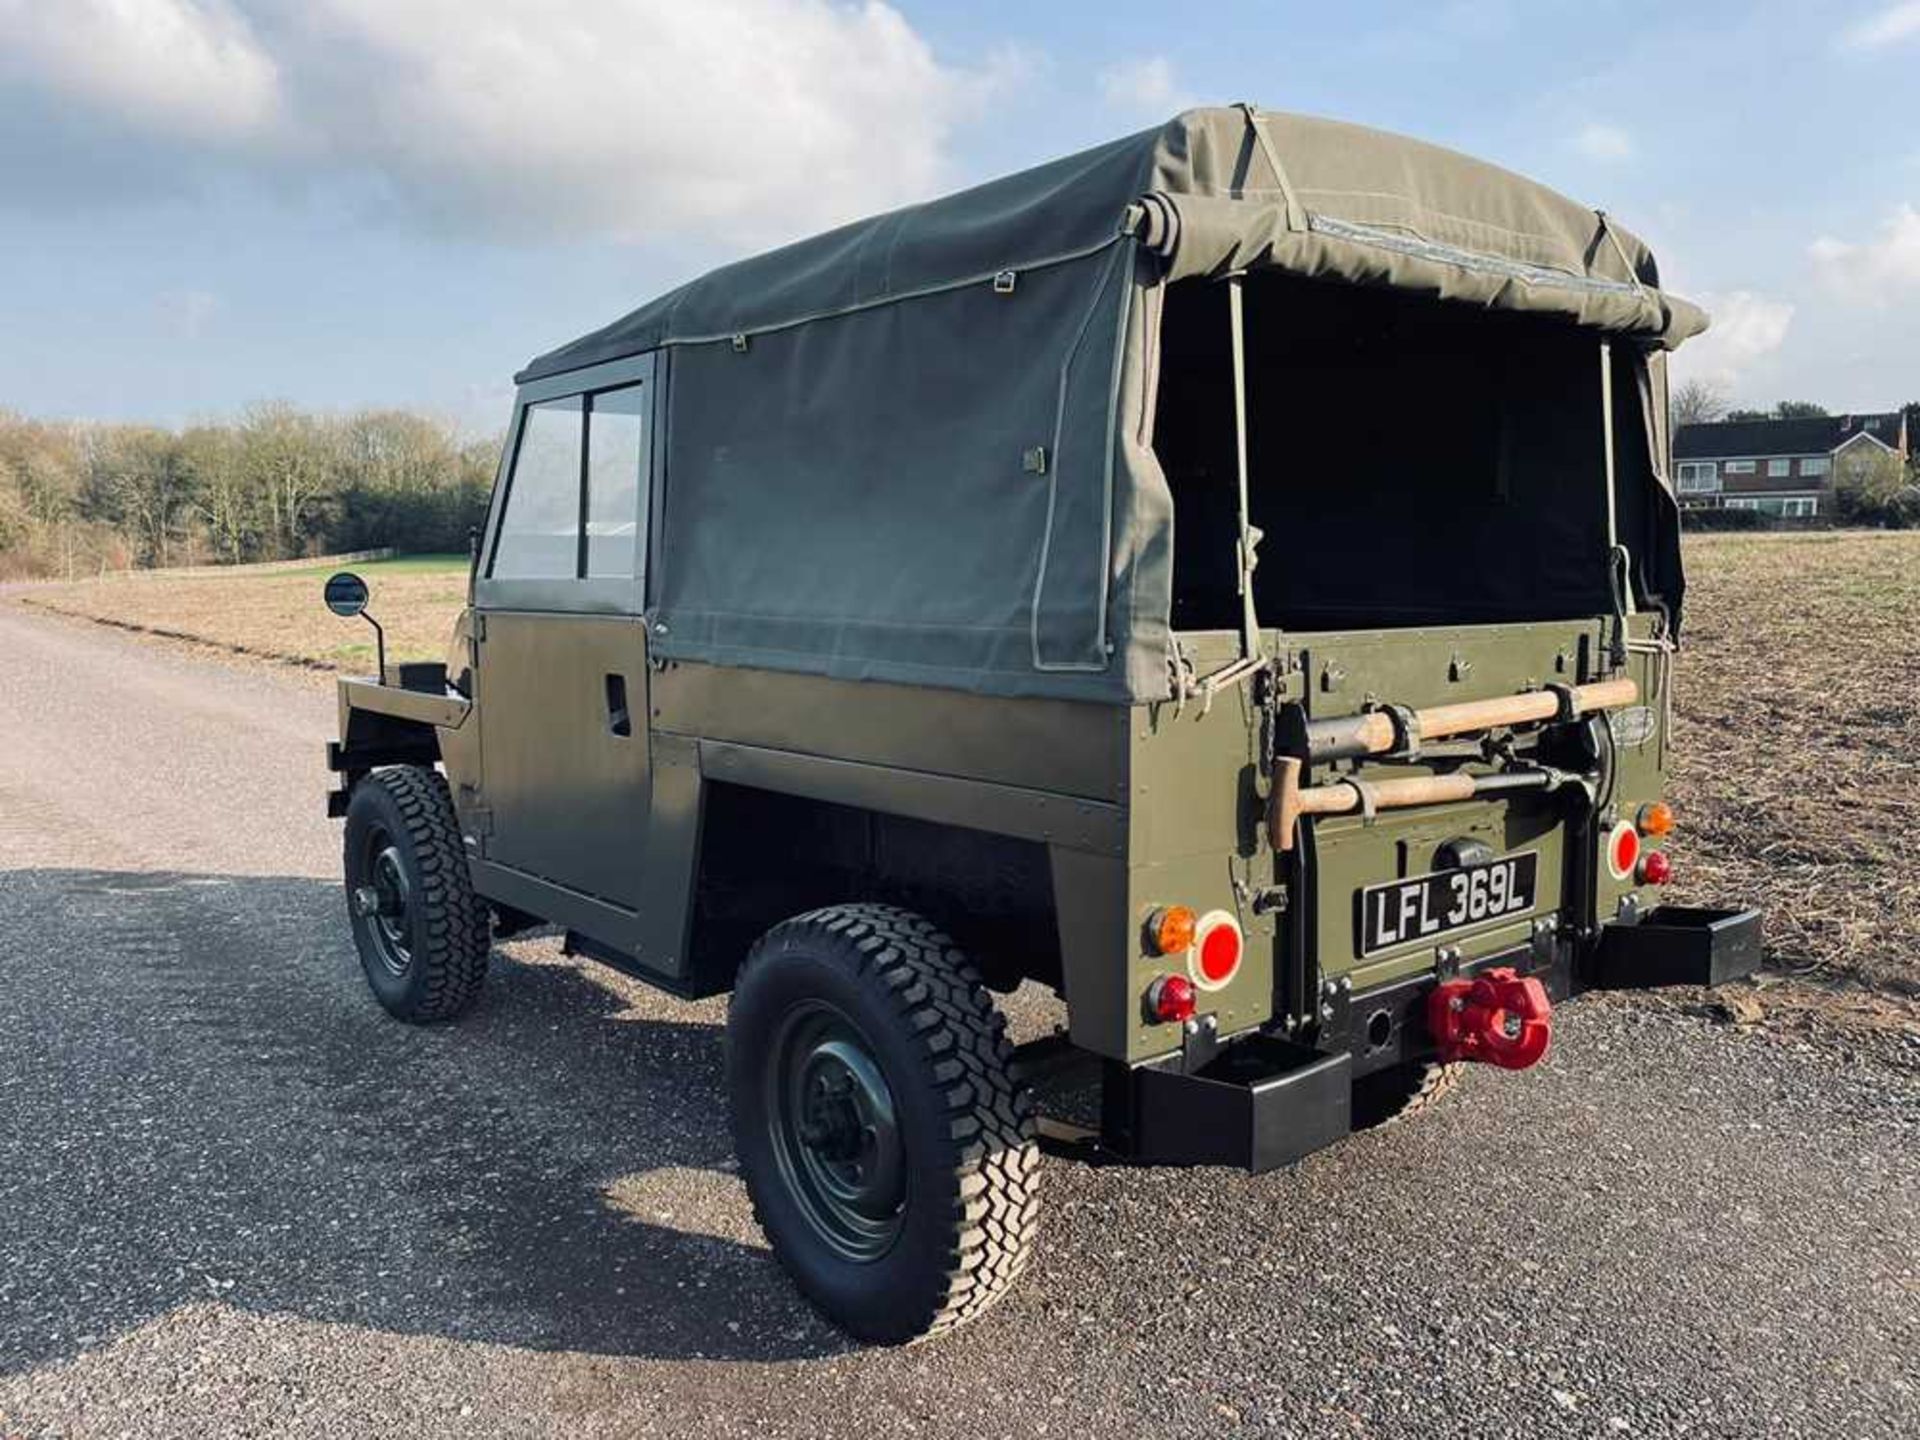 1972 Land Rover 88 Lightweight Extensive restoration recently completed - Image 10 of 22